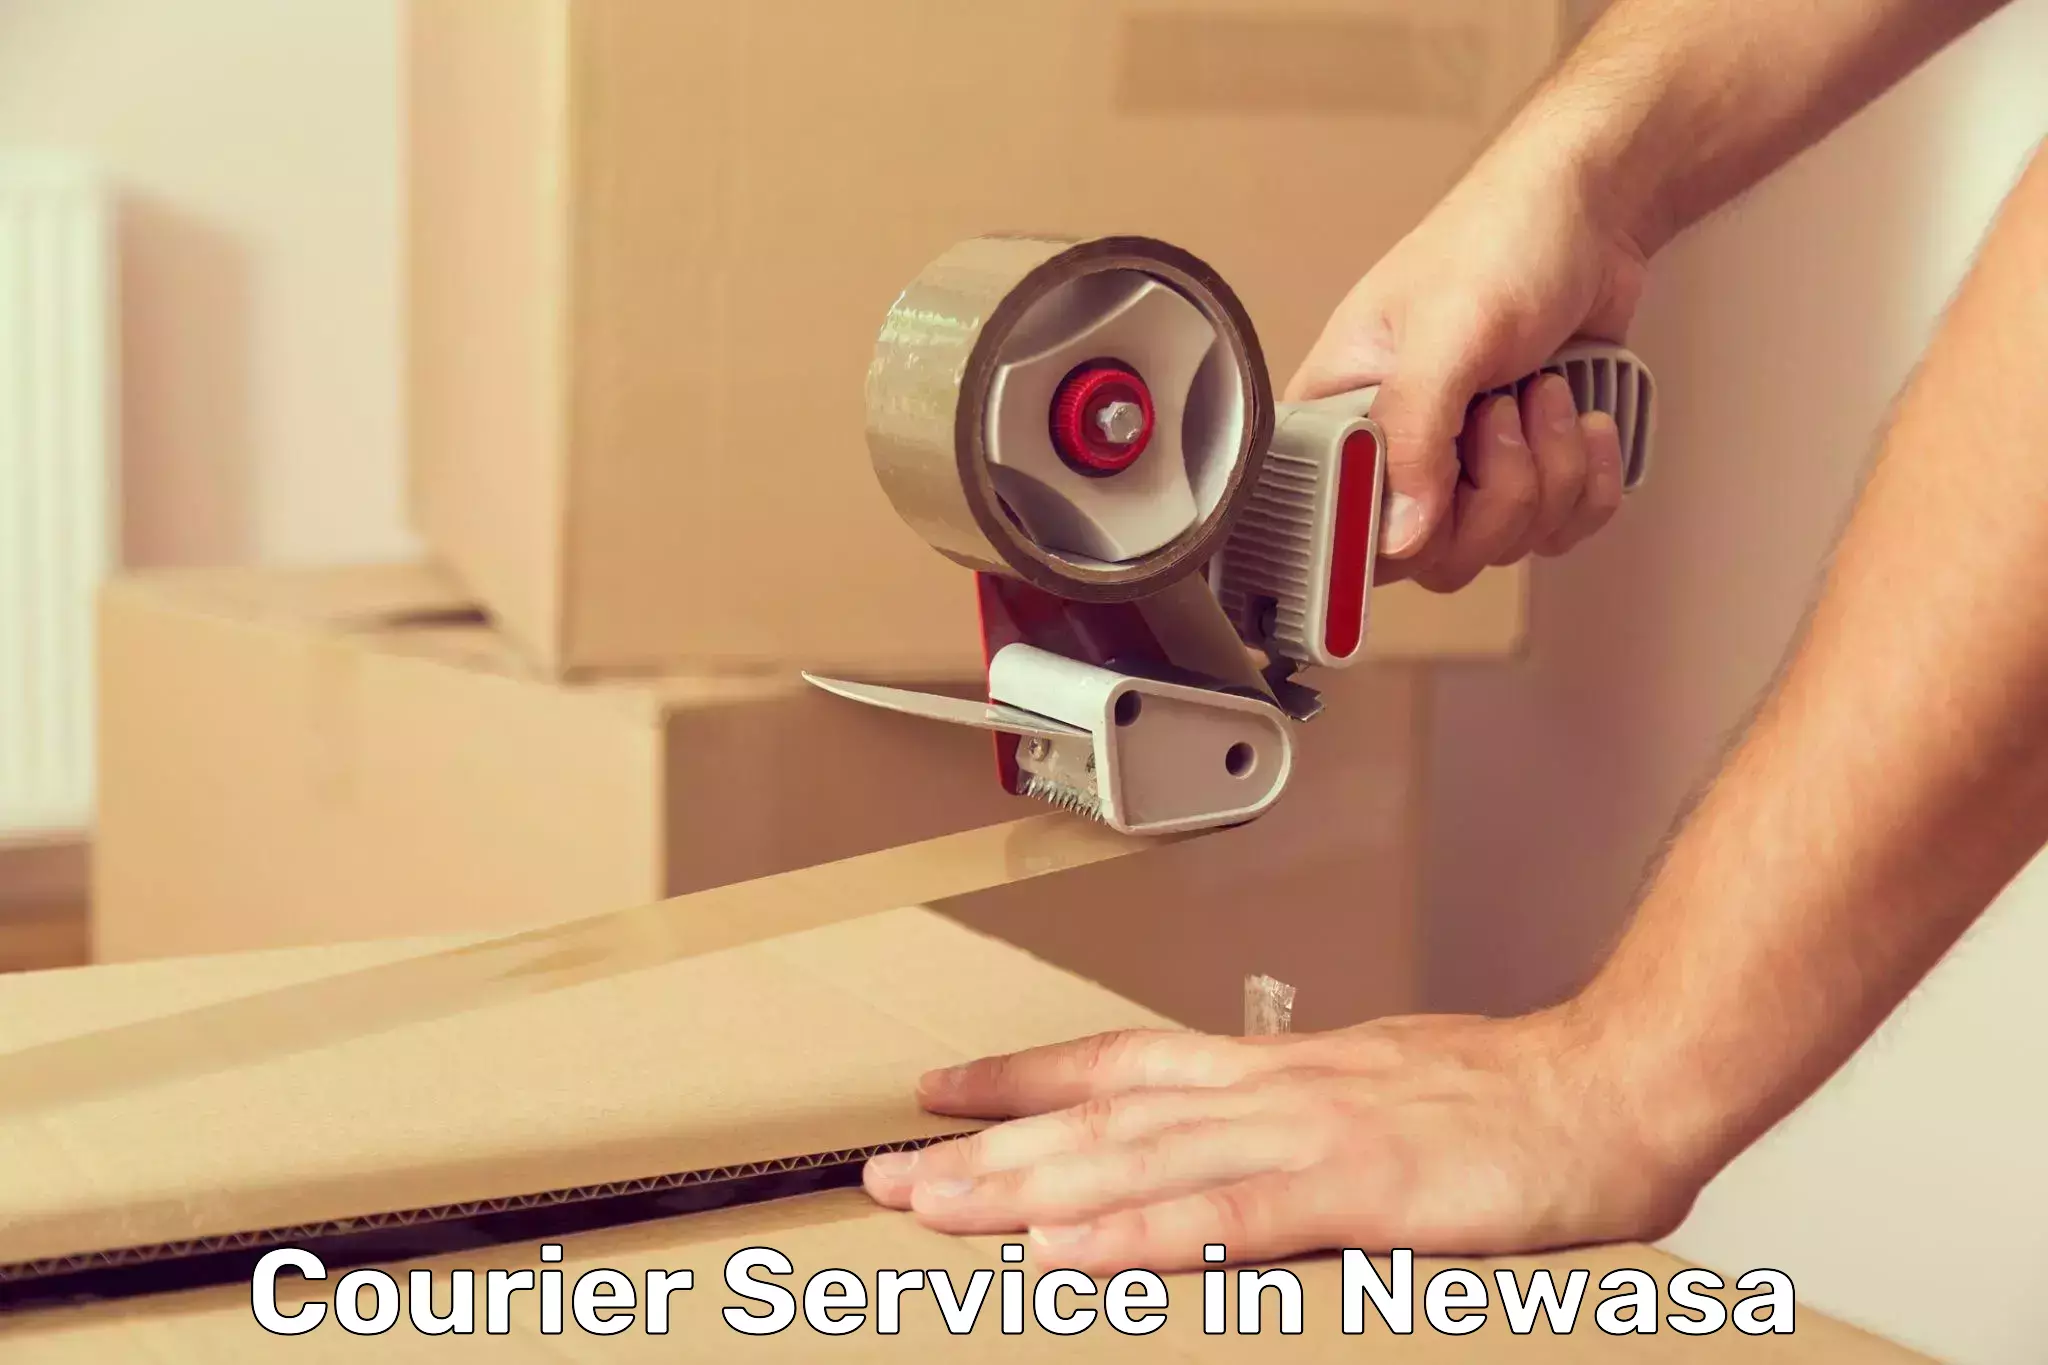 User-friendly delivery service in Newasa